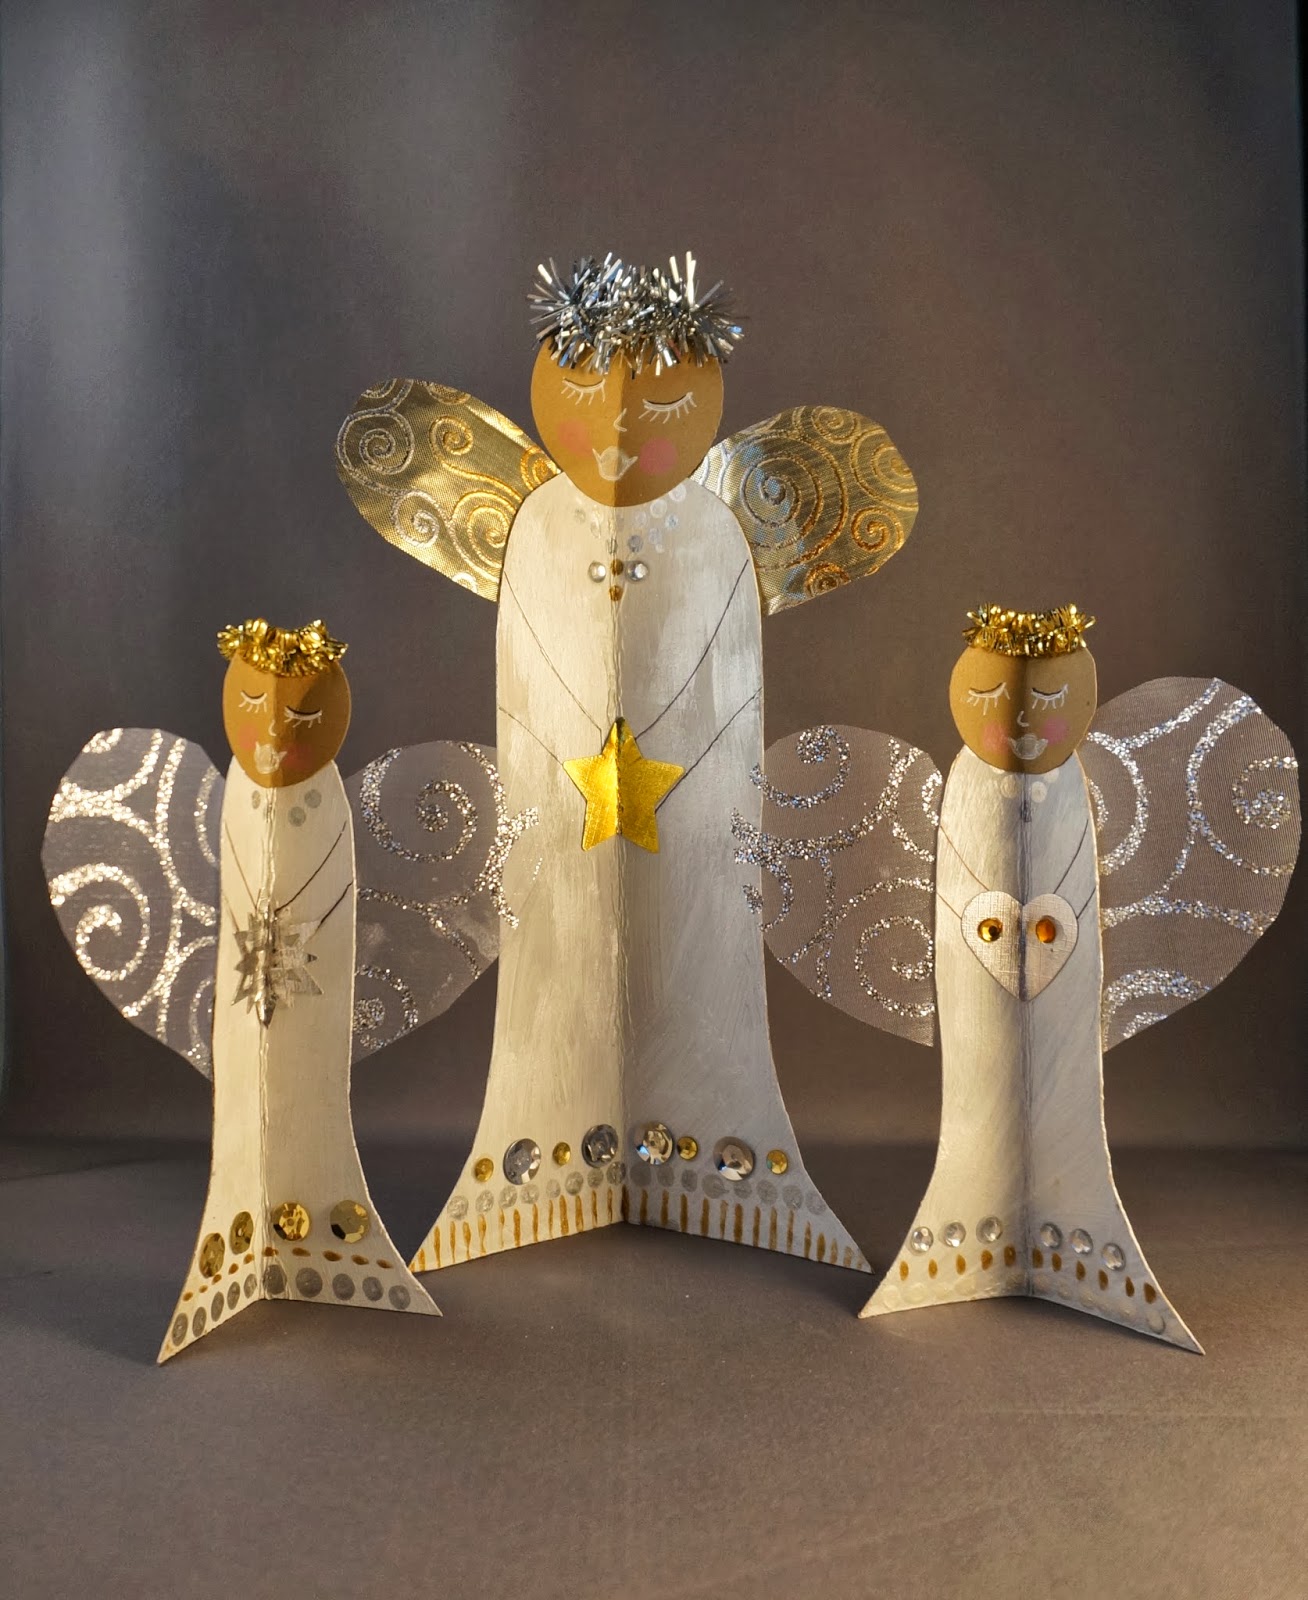 Paper angel for christmas decoration made by me. : r/crafts